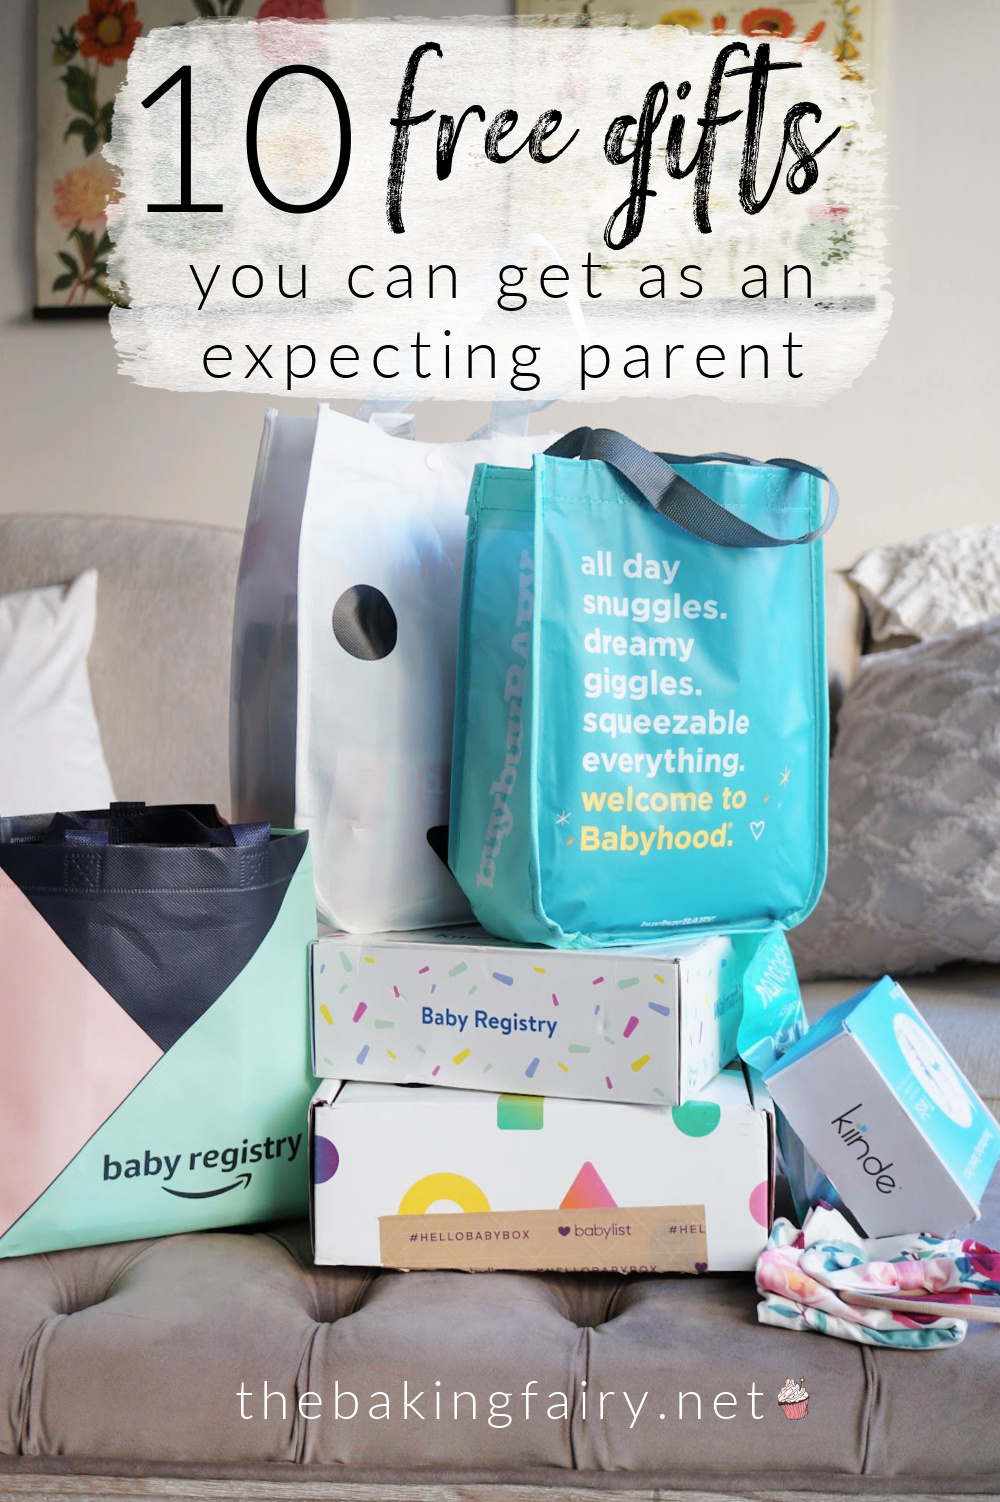 Baby product giveaways